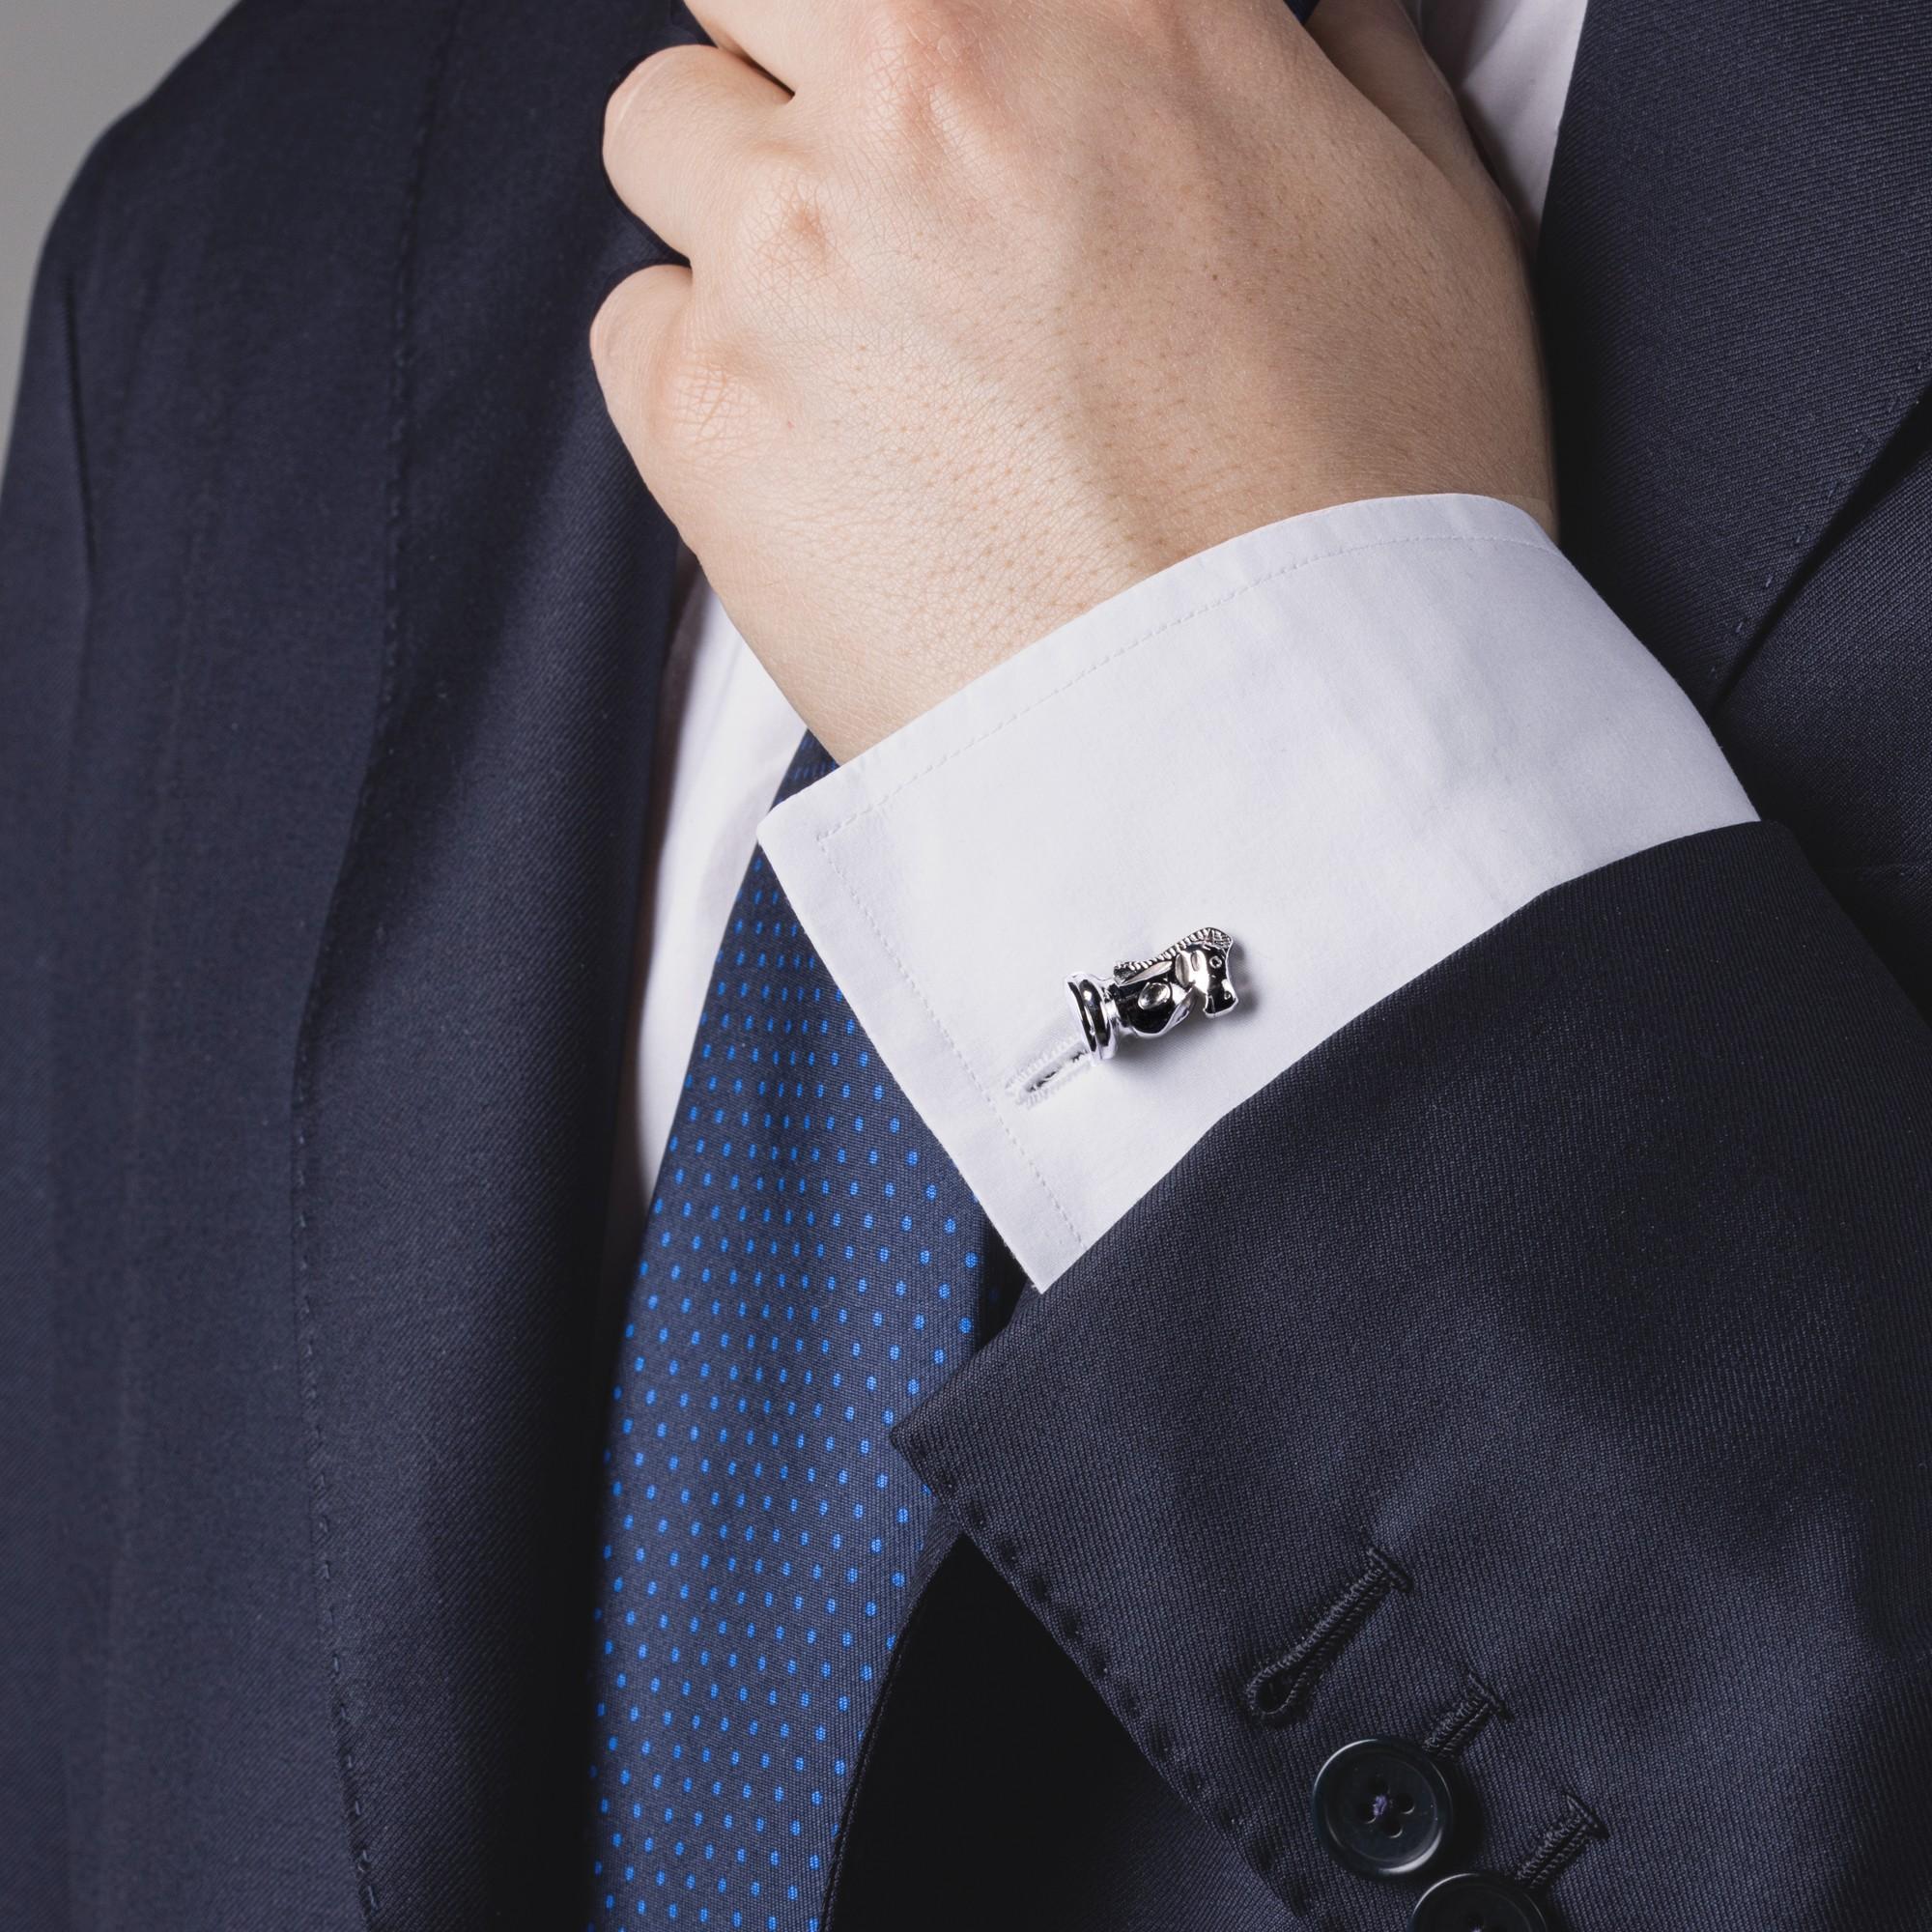 Alex Jona design collection, hand crafted in Italy, Chess Knight Sterling Silver cufflinks. 

Alex Jona cufflinks stand out, not only for their special design and for the excellent quality, but also for the careful attention given to details during